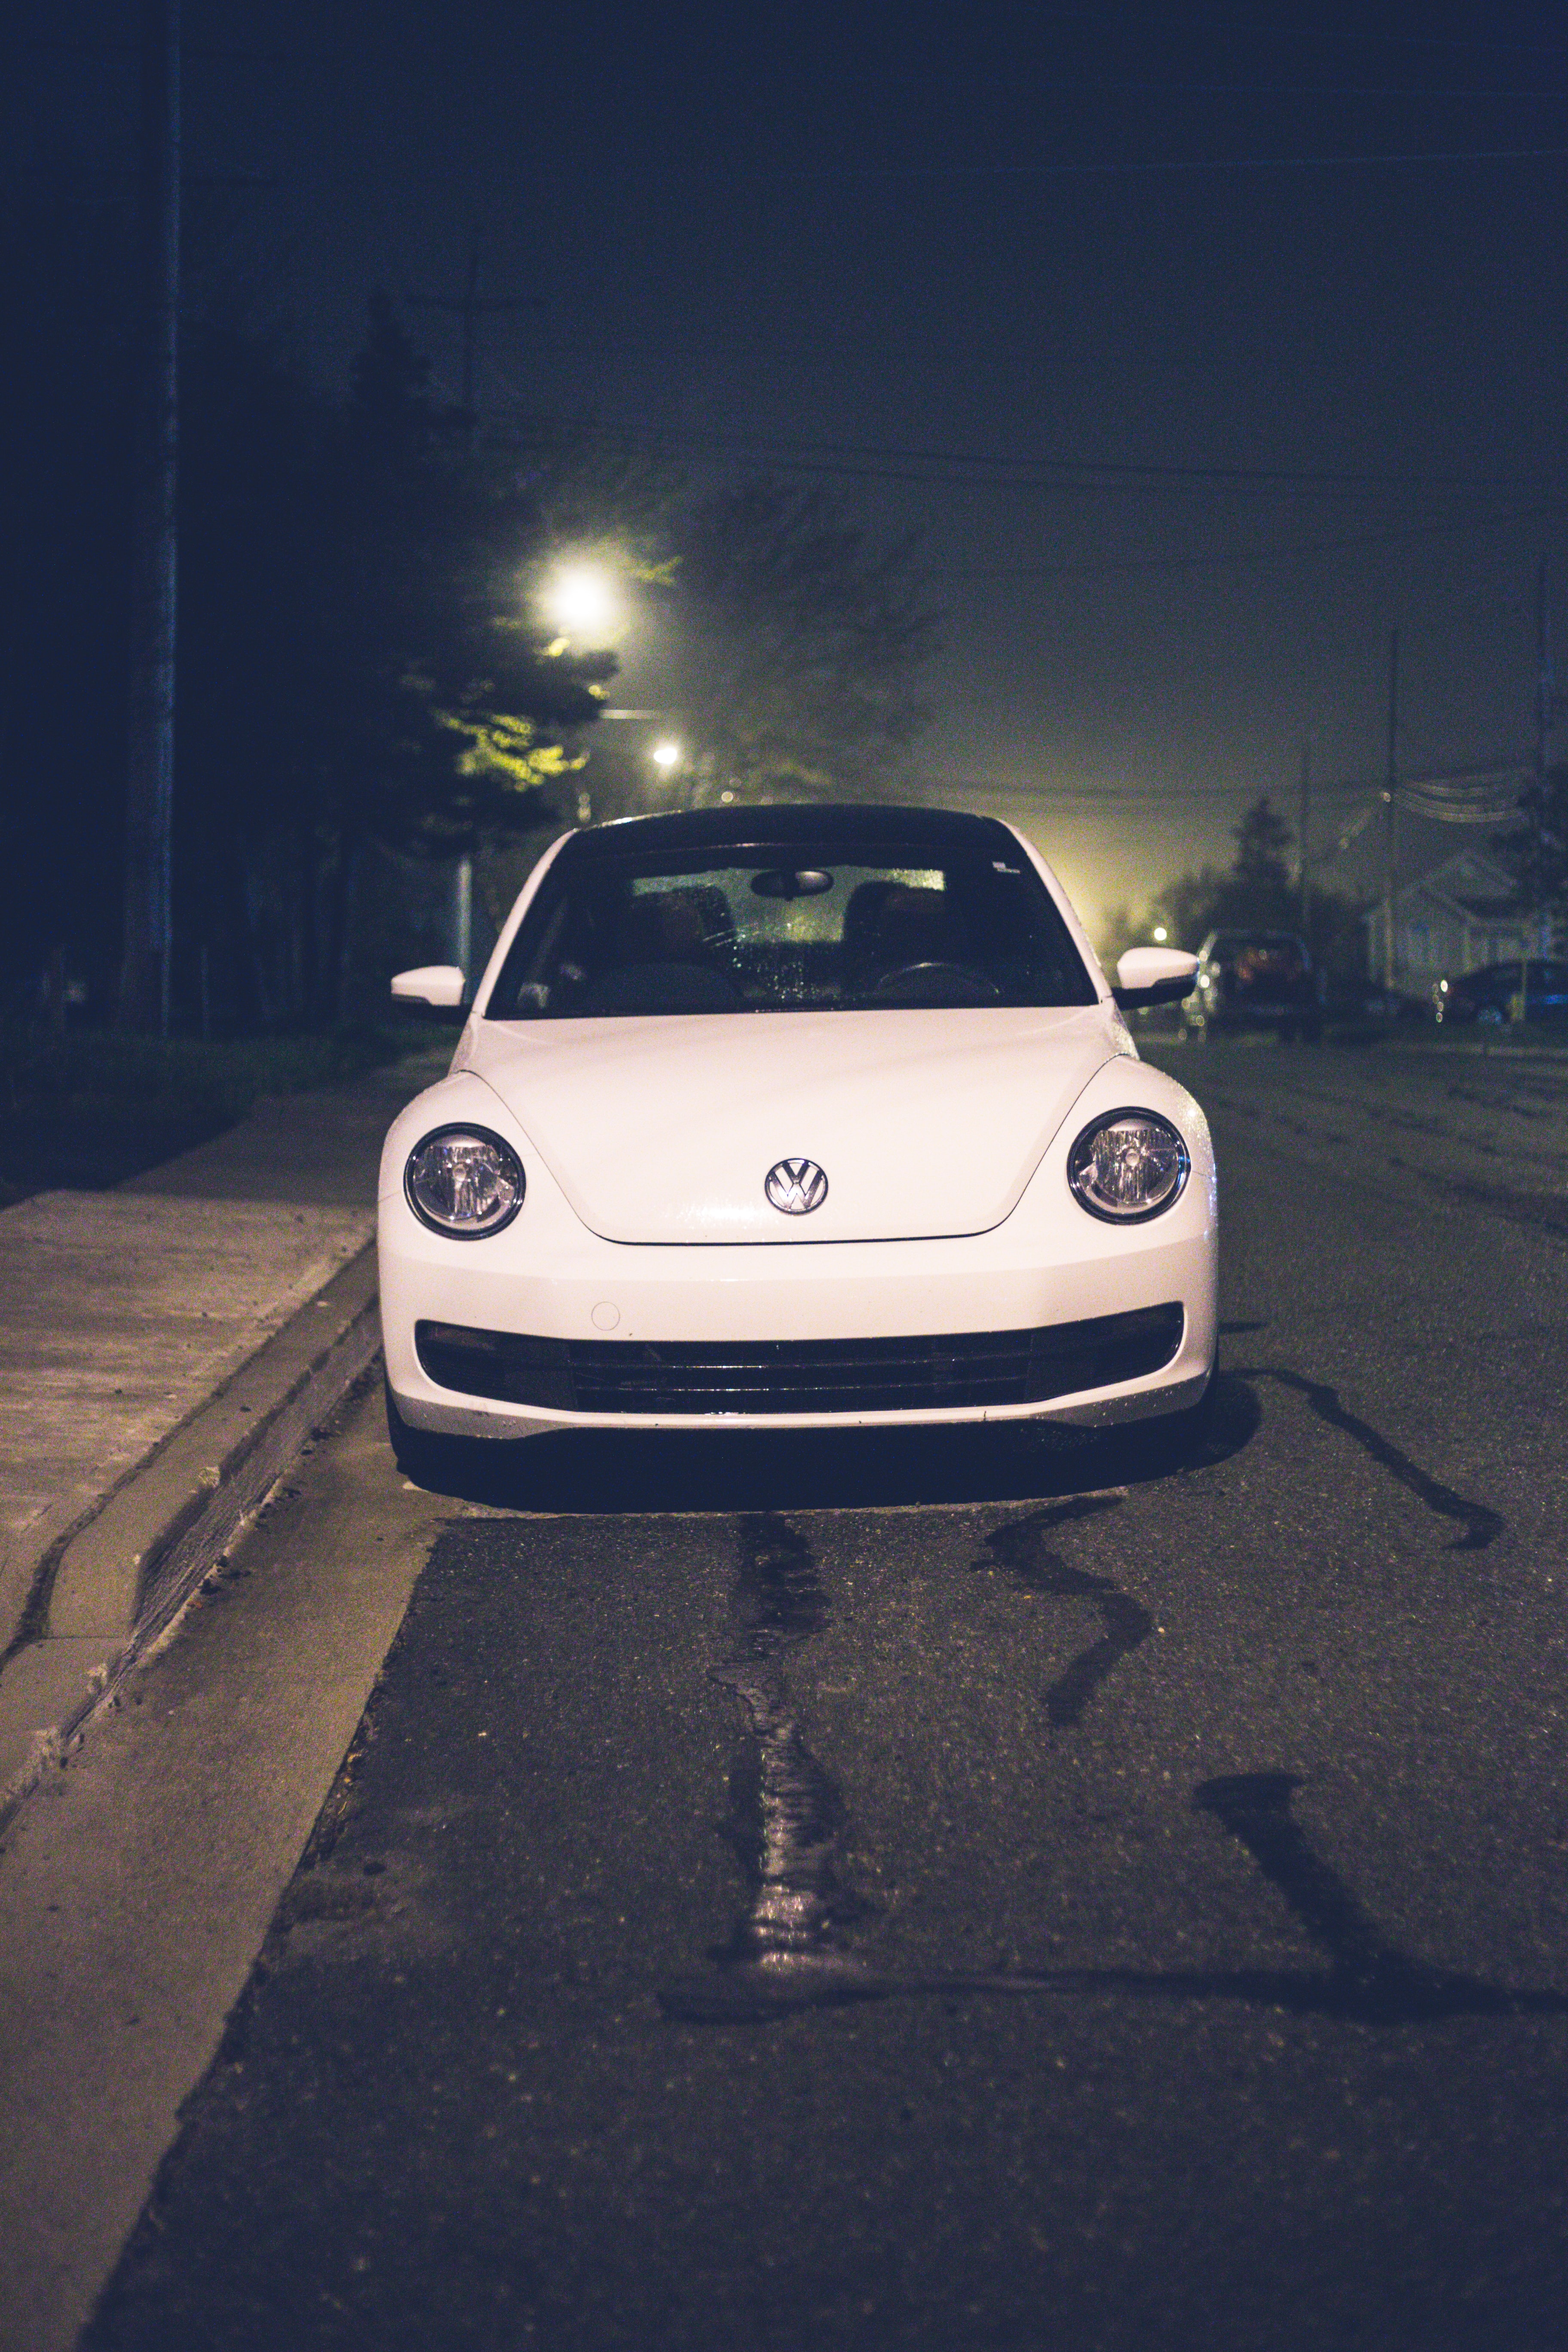 70684 download wallpaper volkswagen, cars, white, car, front view, machine screensavers and pictures for free